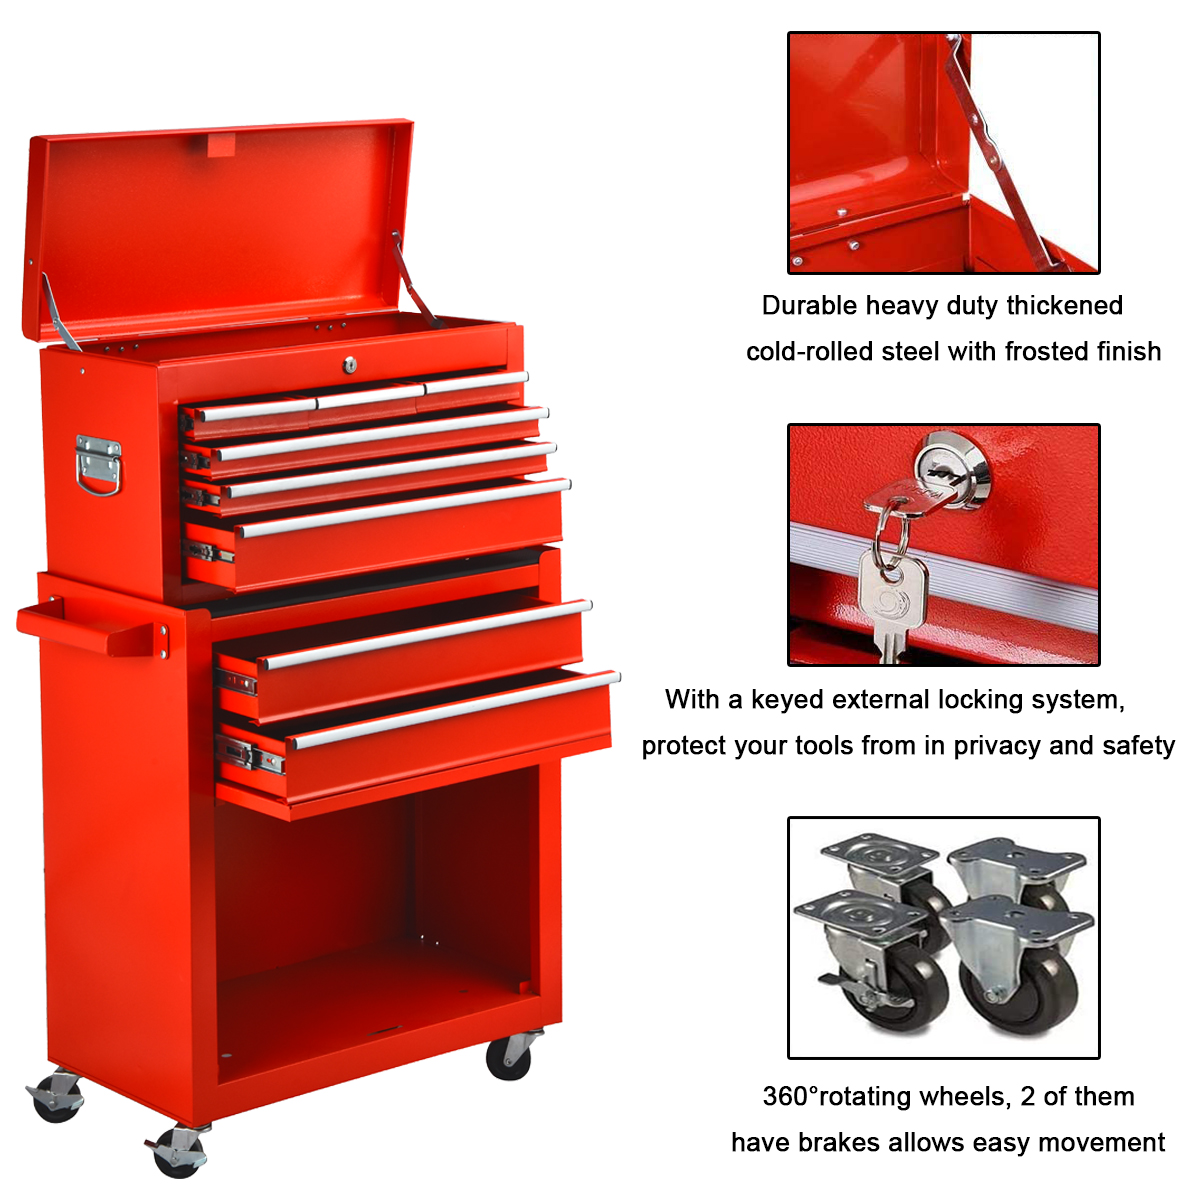 Odaof 8 Drawer Mechanic Tool Chest with Wheels Heavy Duty Rolling Tool Box Cabinet with Riser Sliding Drawers Keyed Locking System Top Detachable Toolbox Organizer for Workshop Red - image 2 of 9